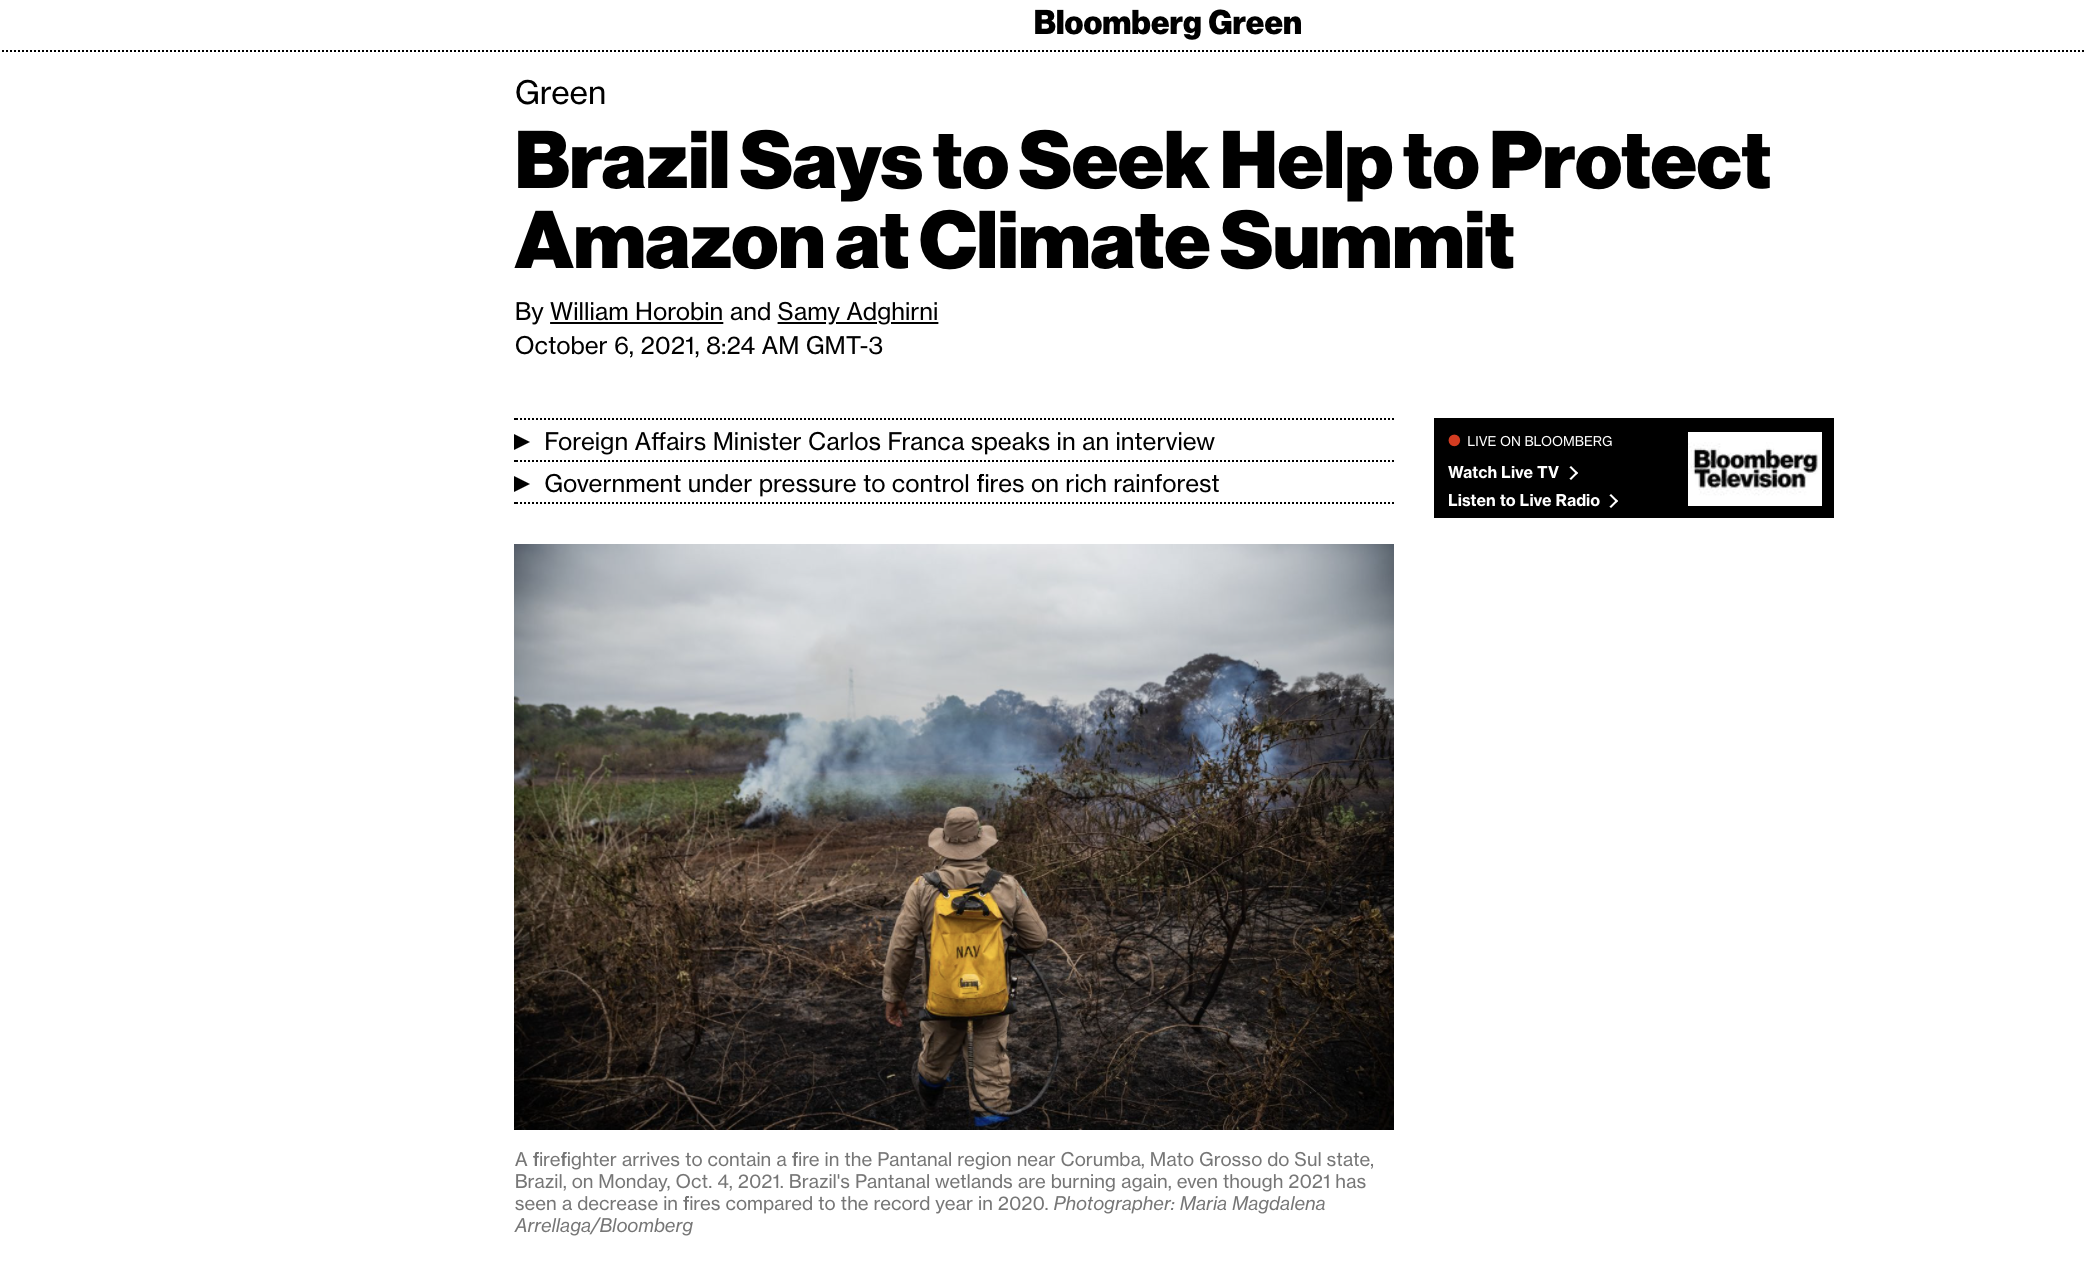 Published in Bloomberg Green: B...otect Amazon at Climate Summit 